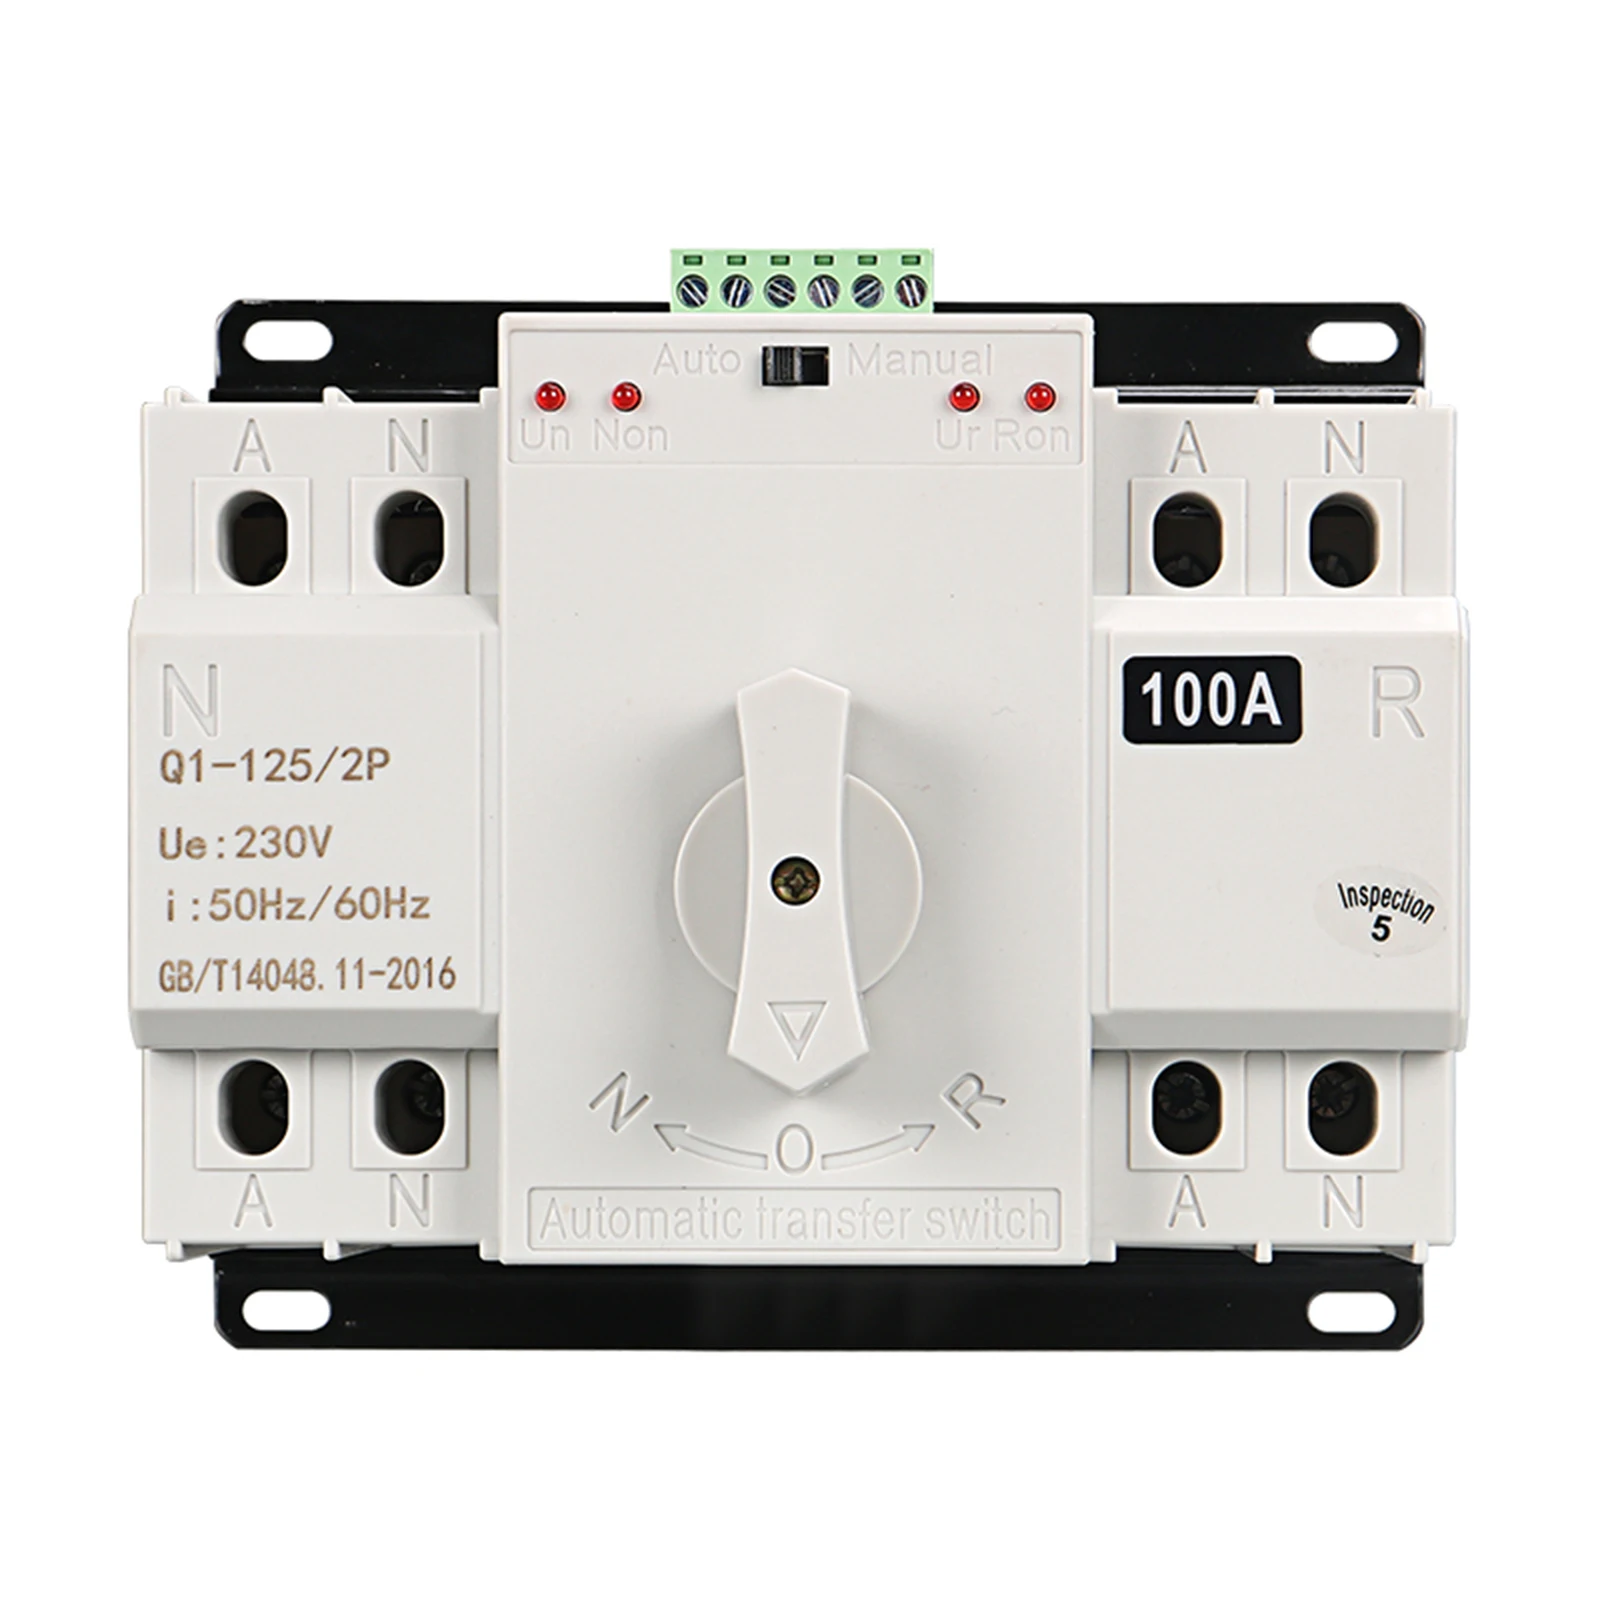 

Double Power Transfer Switch 2P/4P Three-phase Automatic Diverter Switch ATS For UPS Inverters Emergency Power Tool Parts